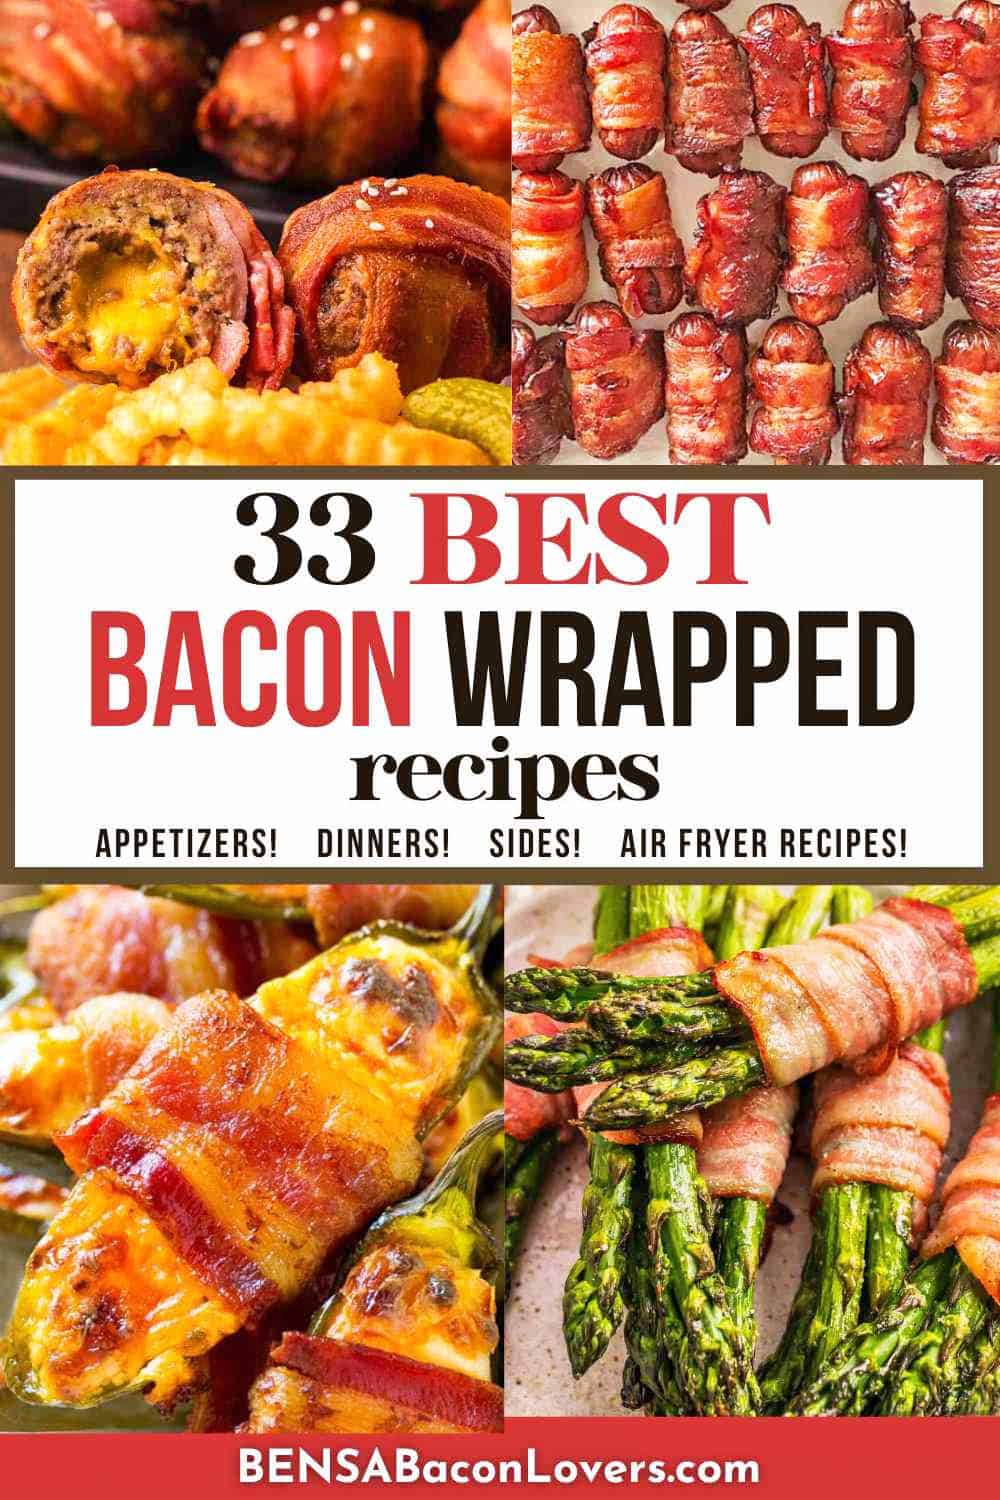 Bacon wrapped burger bites, lil smokies sausages, jalapeno poppers and asparagus bundles.